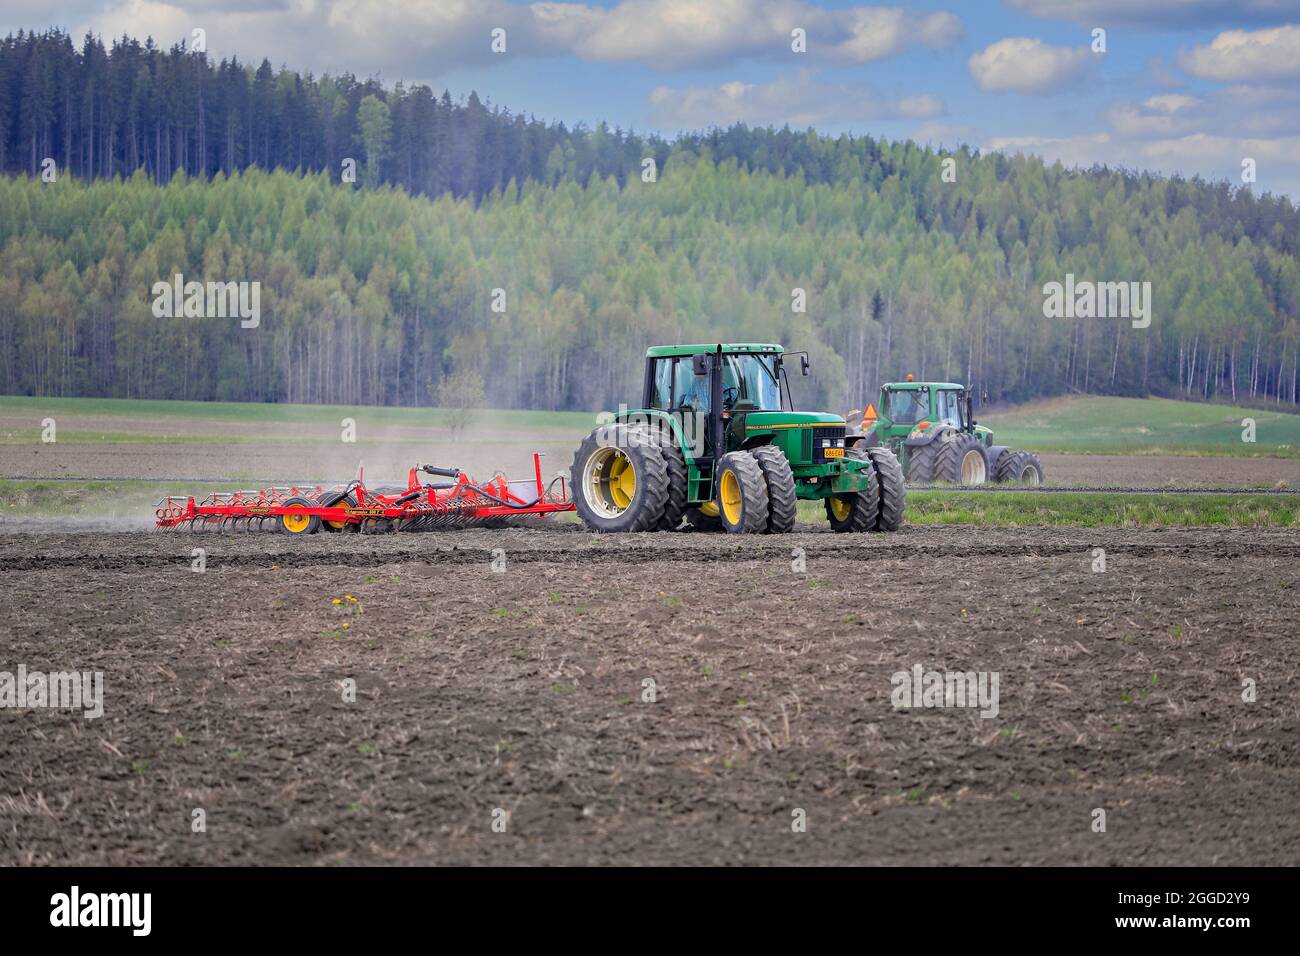 Farmer cultivating field with green John Deere 6520 tractor and Vaderstad harrow, another tractor on the background. Salo, Finland. May 15, 2021. Stock Photo